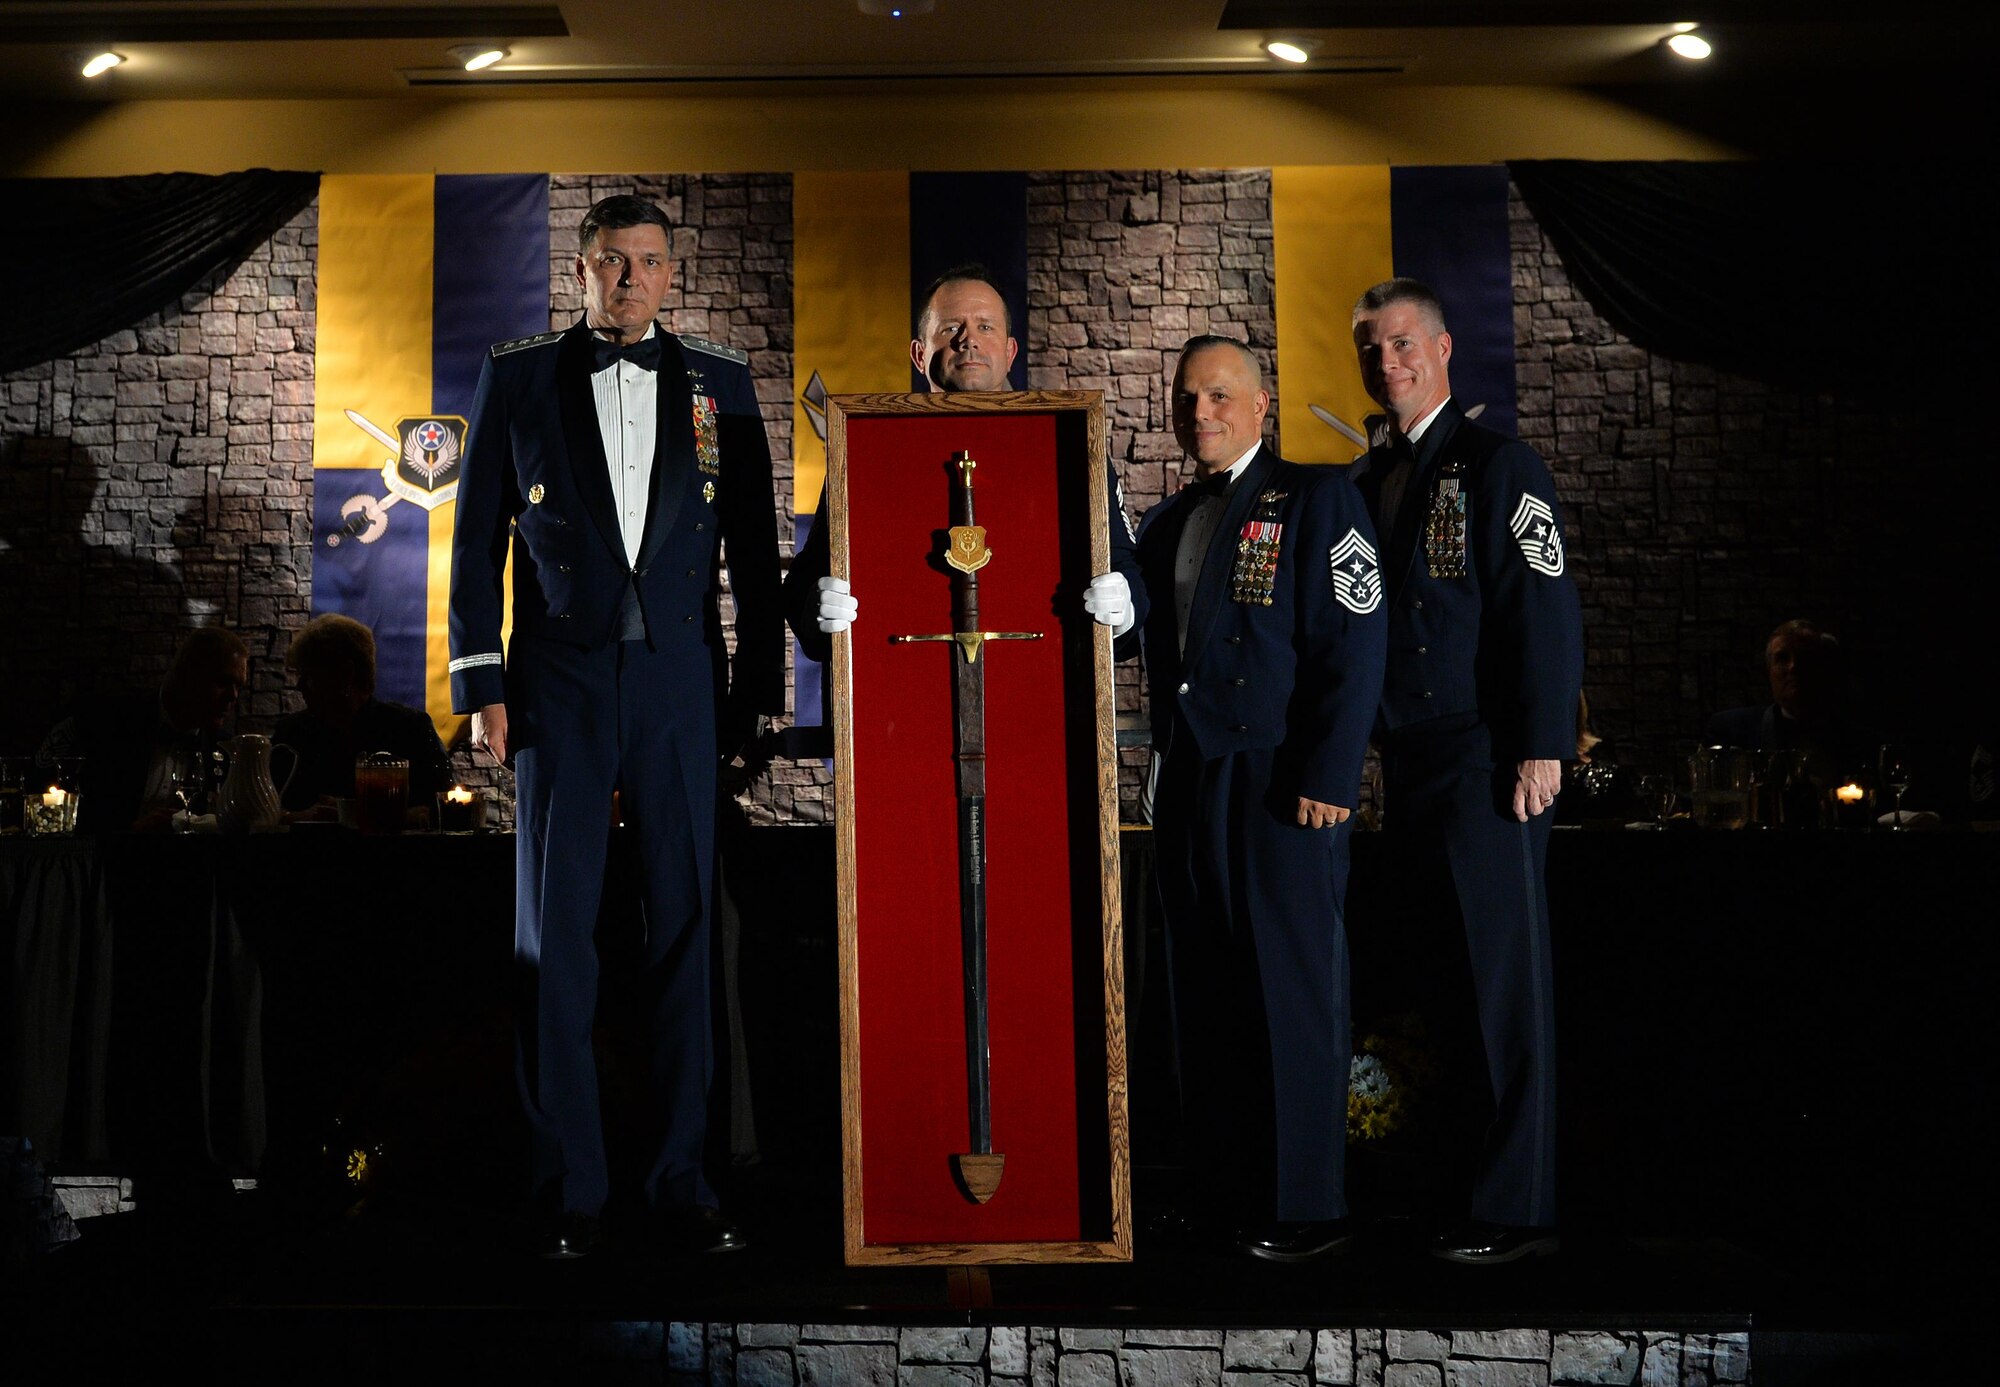 Chiefs present a sword to Lt. Gen. Brad Heithold,the former commander of Air Force Special Operations Command, as part the Order of the Sword ceremony at Hurlburt Field Fla., Nov. 18, 2016. Heithold is the 10th recipient of AFSOC’s Order of the Sword. (U.S. Air Force photo by Senior Airman Andrea Posey)